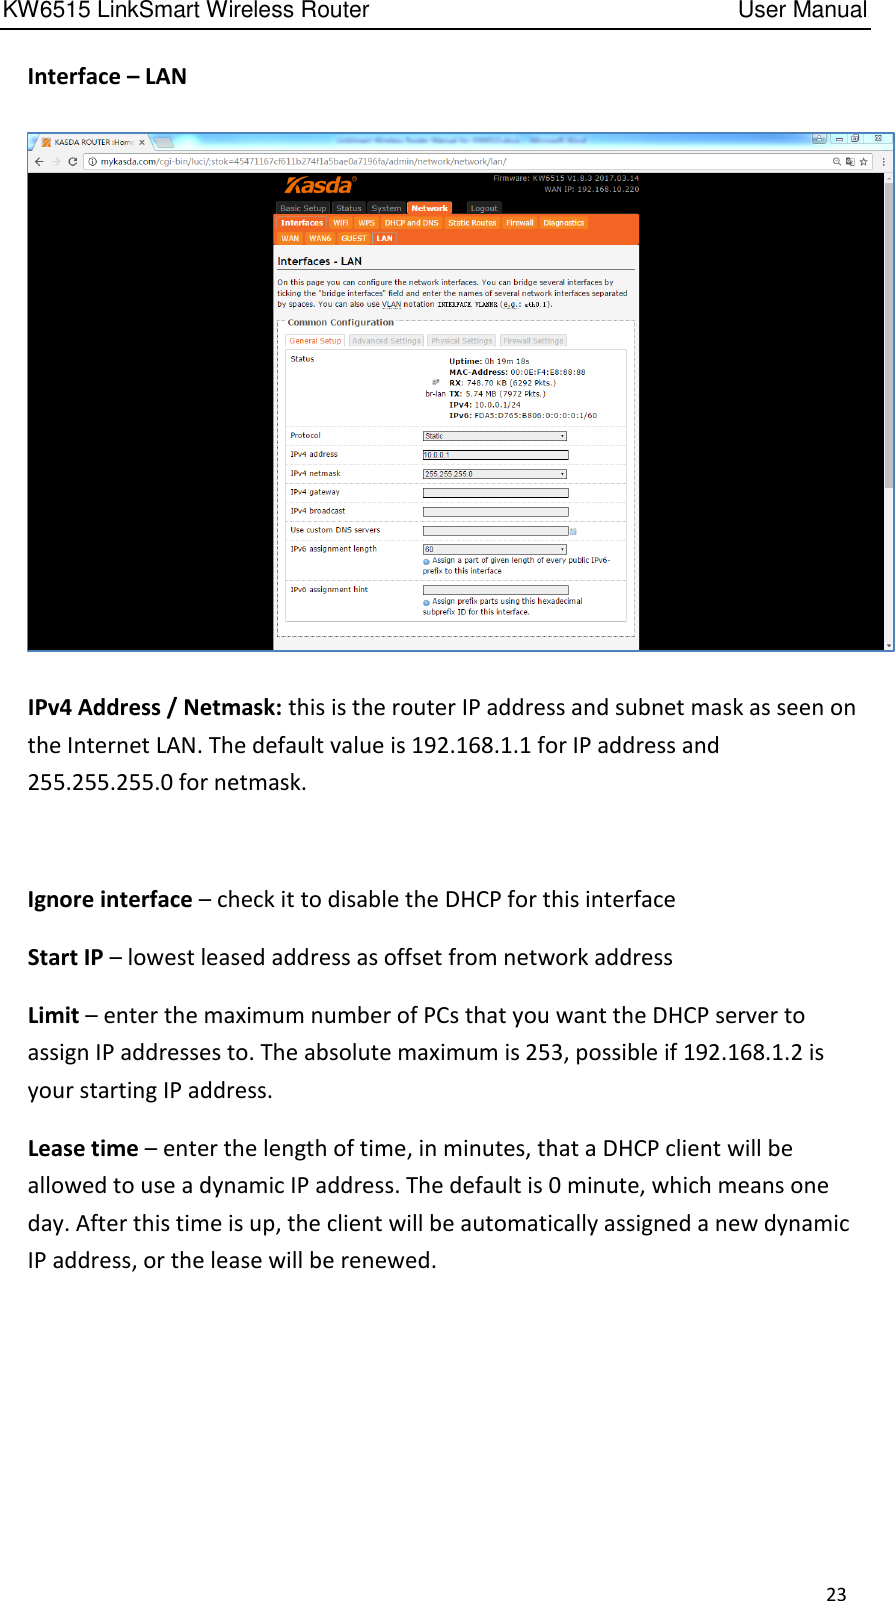 KW6515 LinkSmart Wireless Router         User Manual 23   Interface – LAN    IPv4 Address / Netmask: this is the router IP address and subnet mask as seen on the Internet LAN. The default value is 192.168.1.1 for IP address and 255.255.255.0 for netmask.      Ignore interface – check it to disable the DHCP for this interface   Start IP – lowest leased address as offset from network address   Limit – enter the maximum number of PCs that you want the DHCP server to assign IP addresses to. The absolute maximum is 253, possible if 192.168.1.2 is your starting IP address.   Lease time – enter the length of time, in minutes, that a DHCP client will be allowed to use a dynamic IP address. The default is 0 minute, which means one day. After this time is up, the client will be automatically assigned a new dynamic IP address, or the lease will be renewed.     